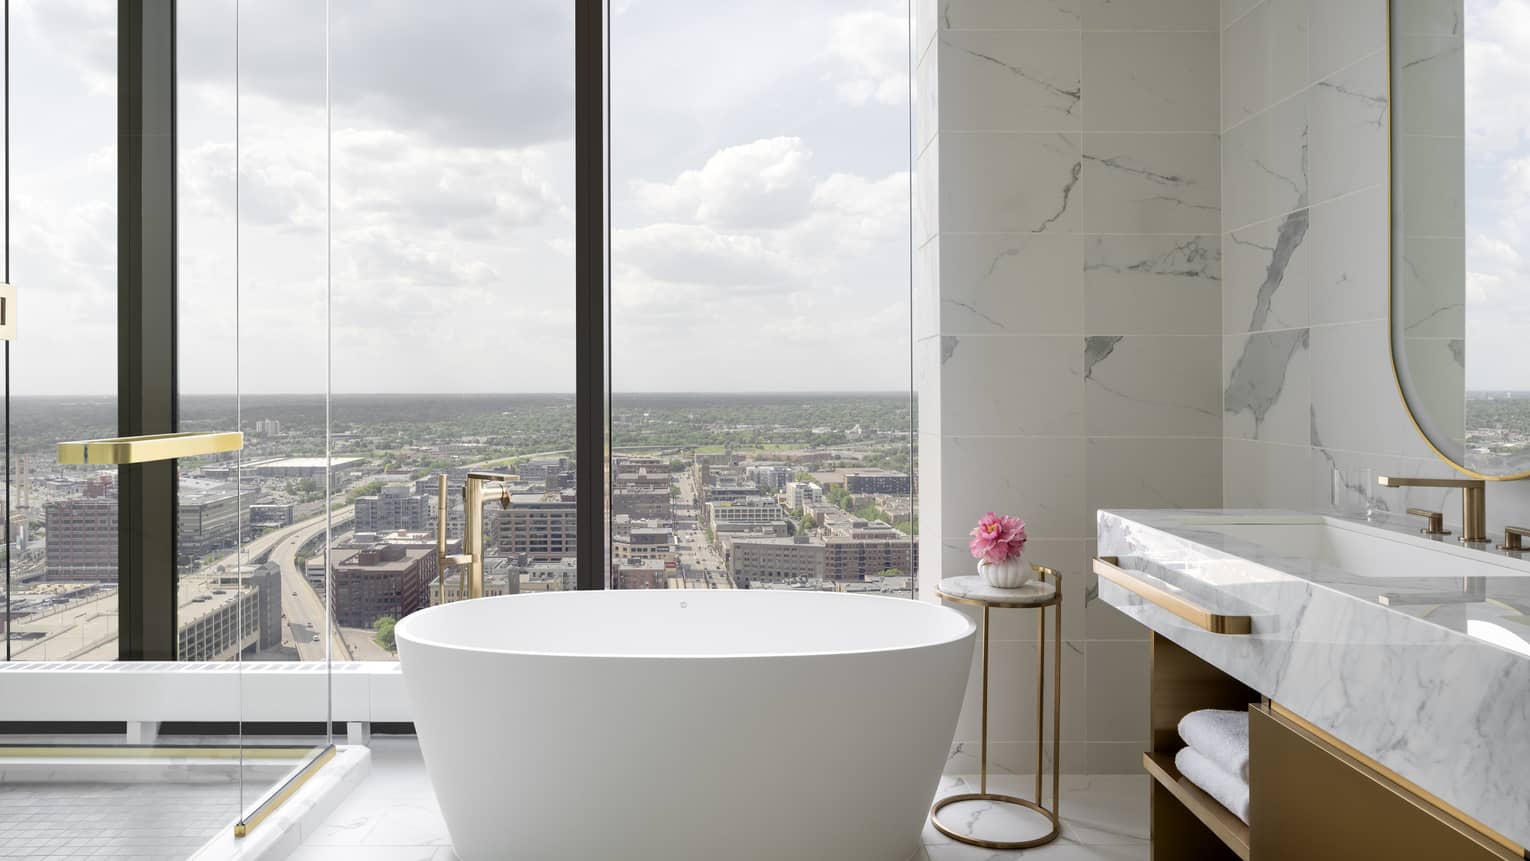 Bathroom with wall of windows and standalone tub